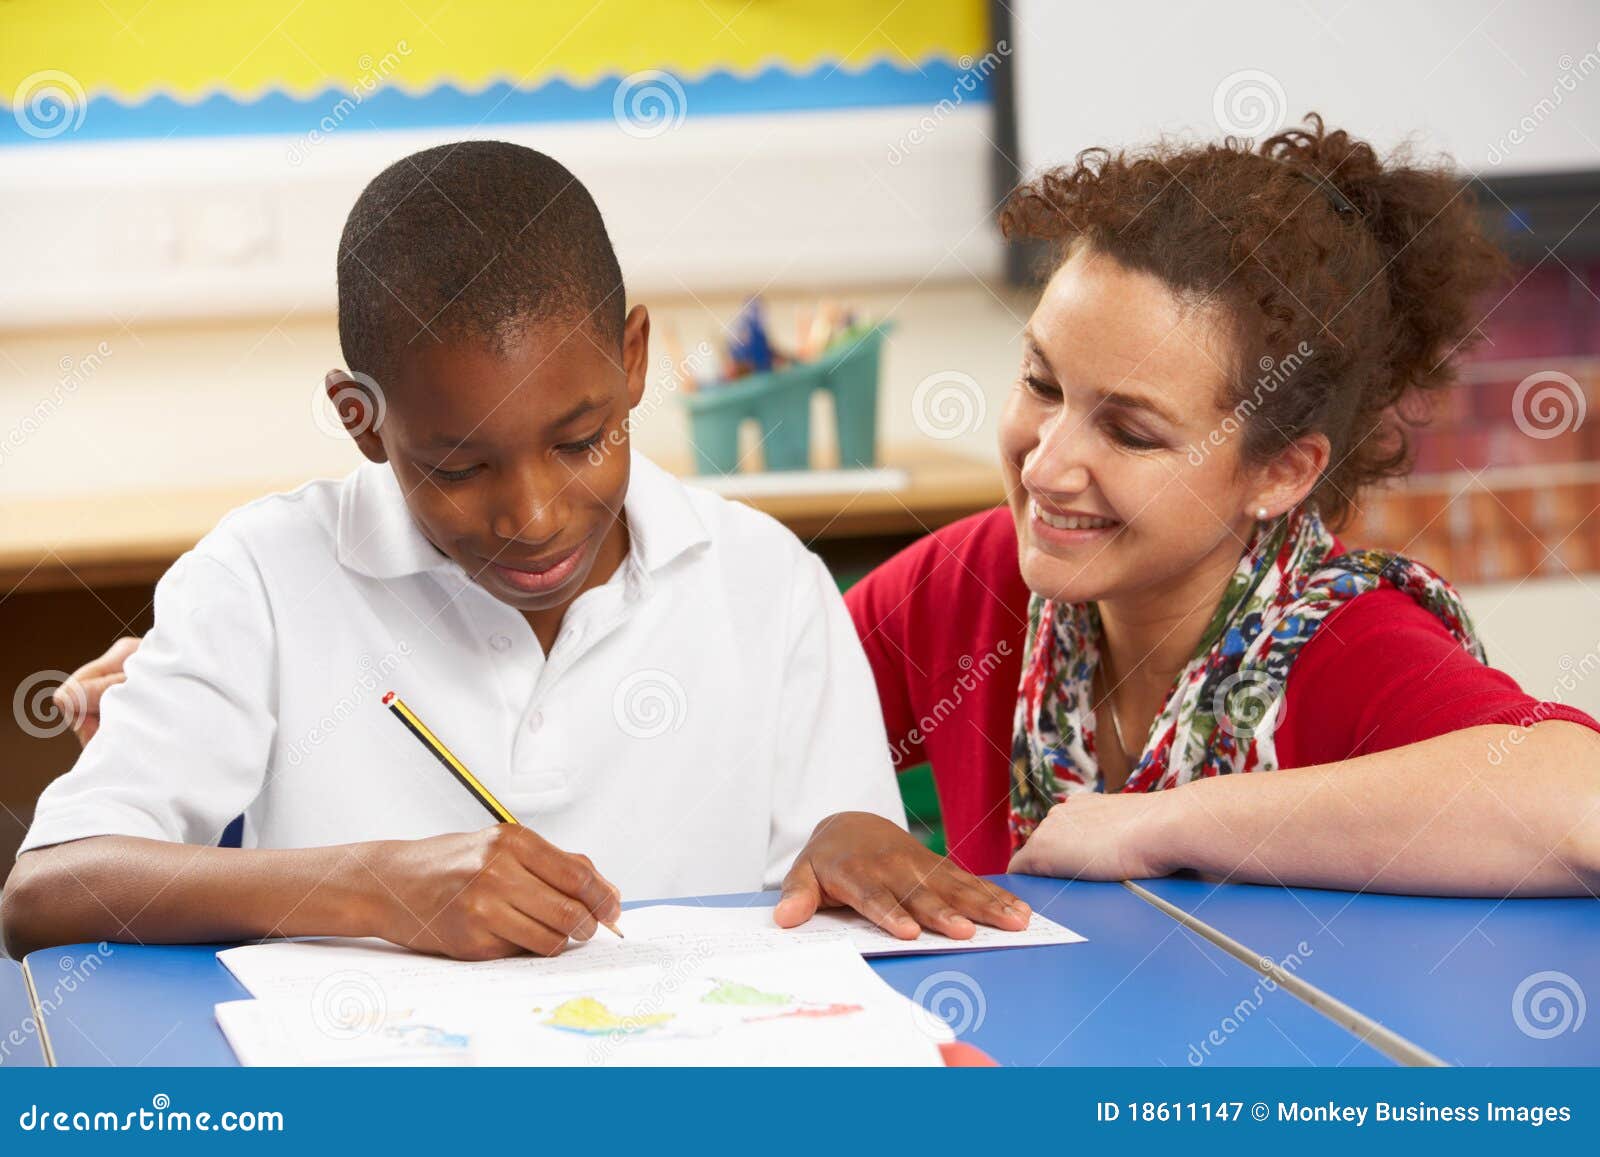 schoolboy studying in classroom with teacher